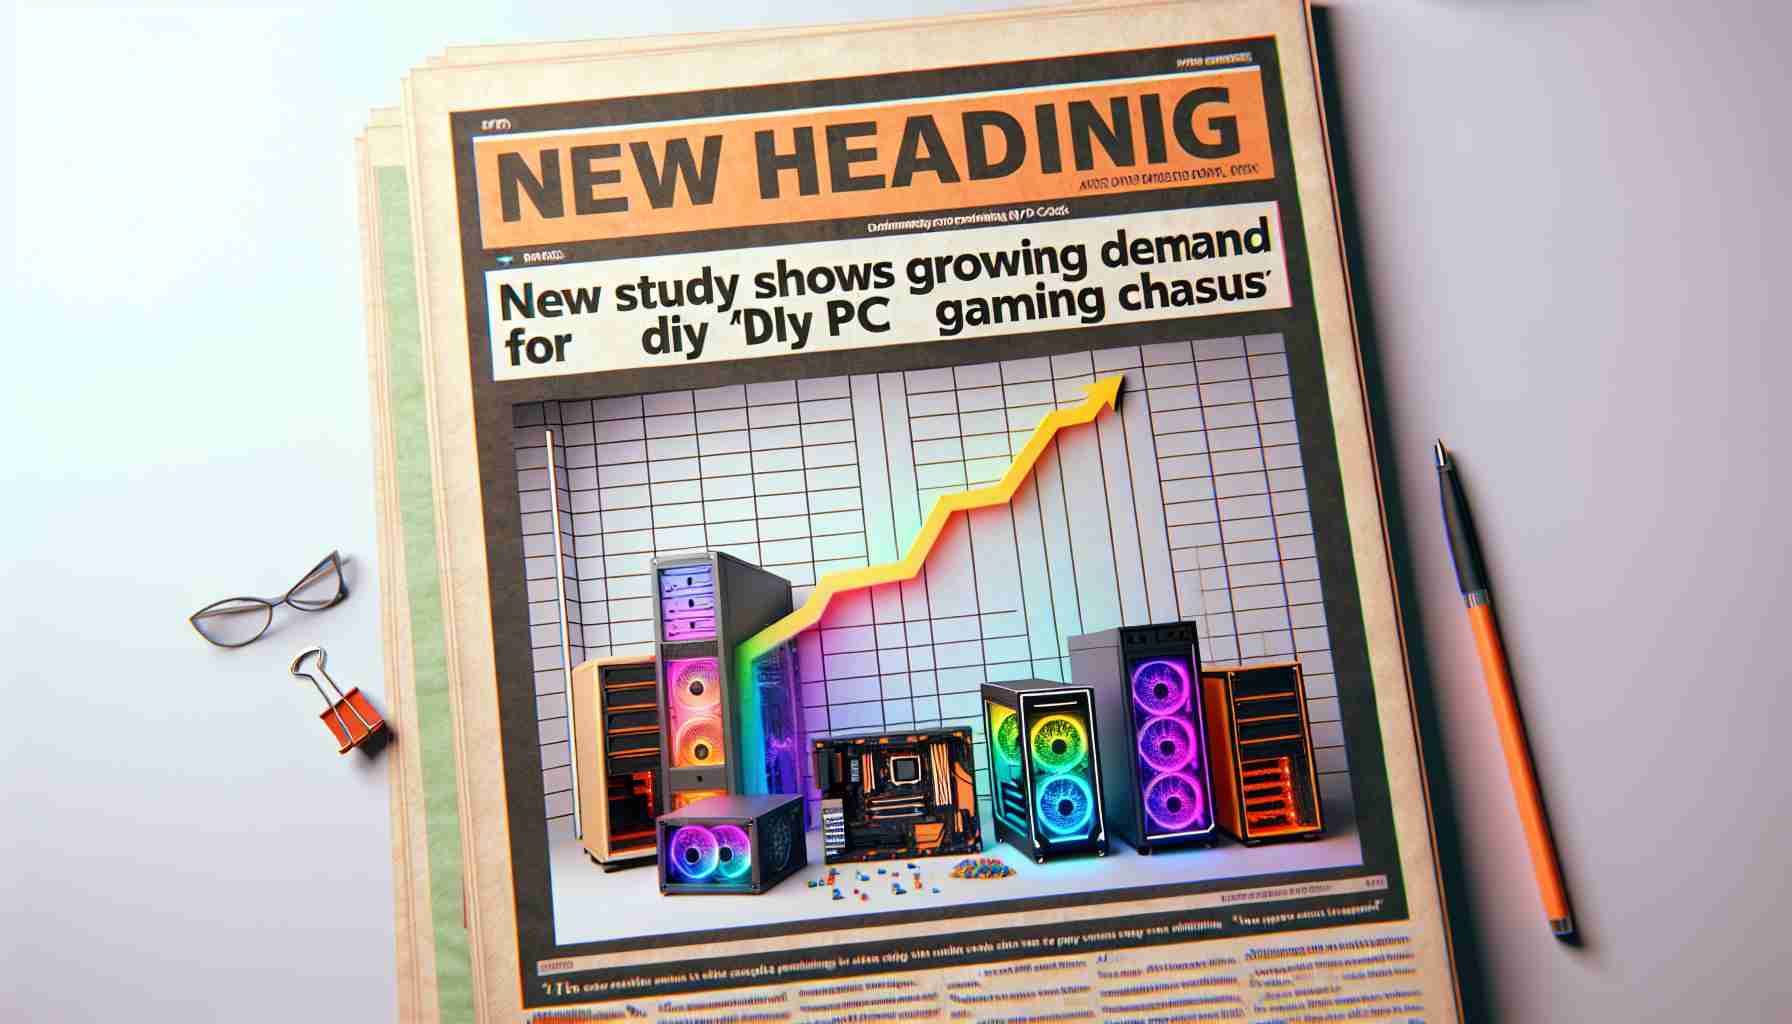 New Study Shows Growing Demand for DIY PC Gaming Chassis